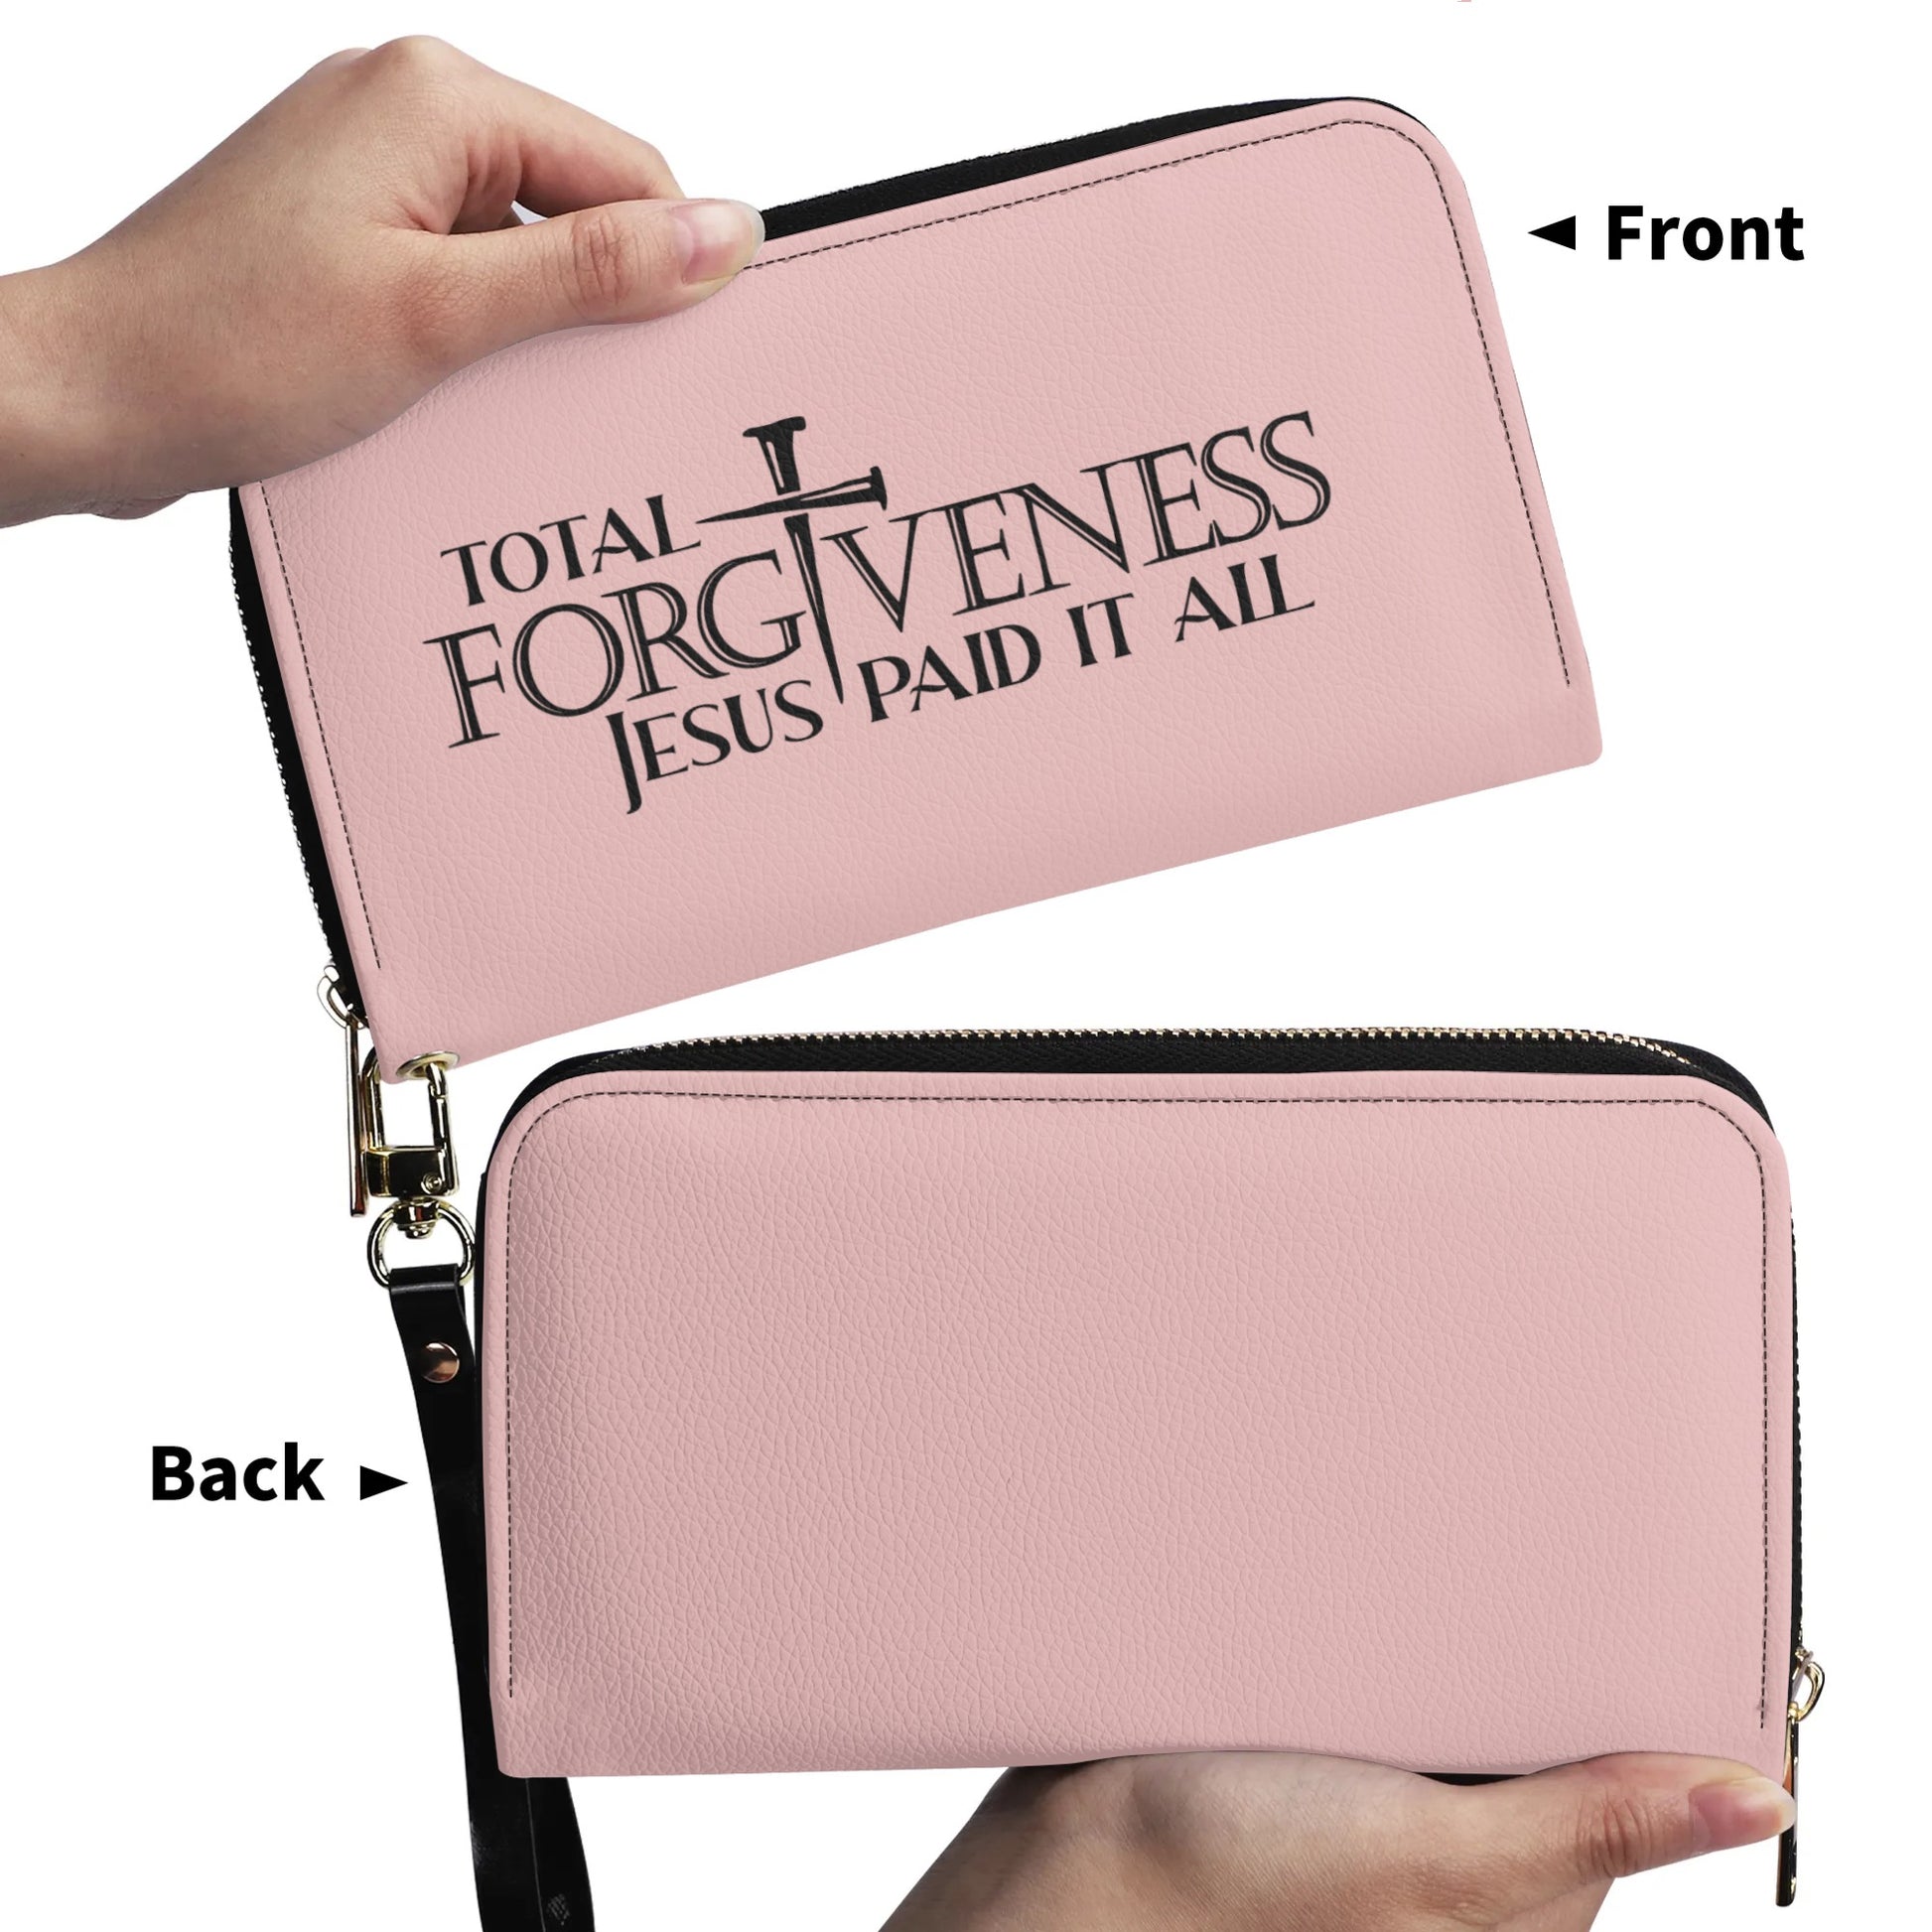 Total Forgiveness Jesus Paid It All PU Leather Womens Christian Wallet popcustoms